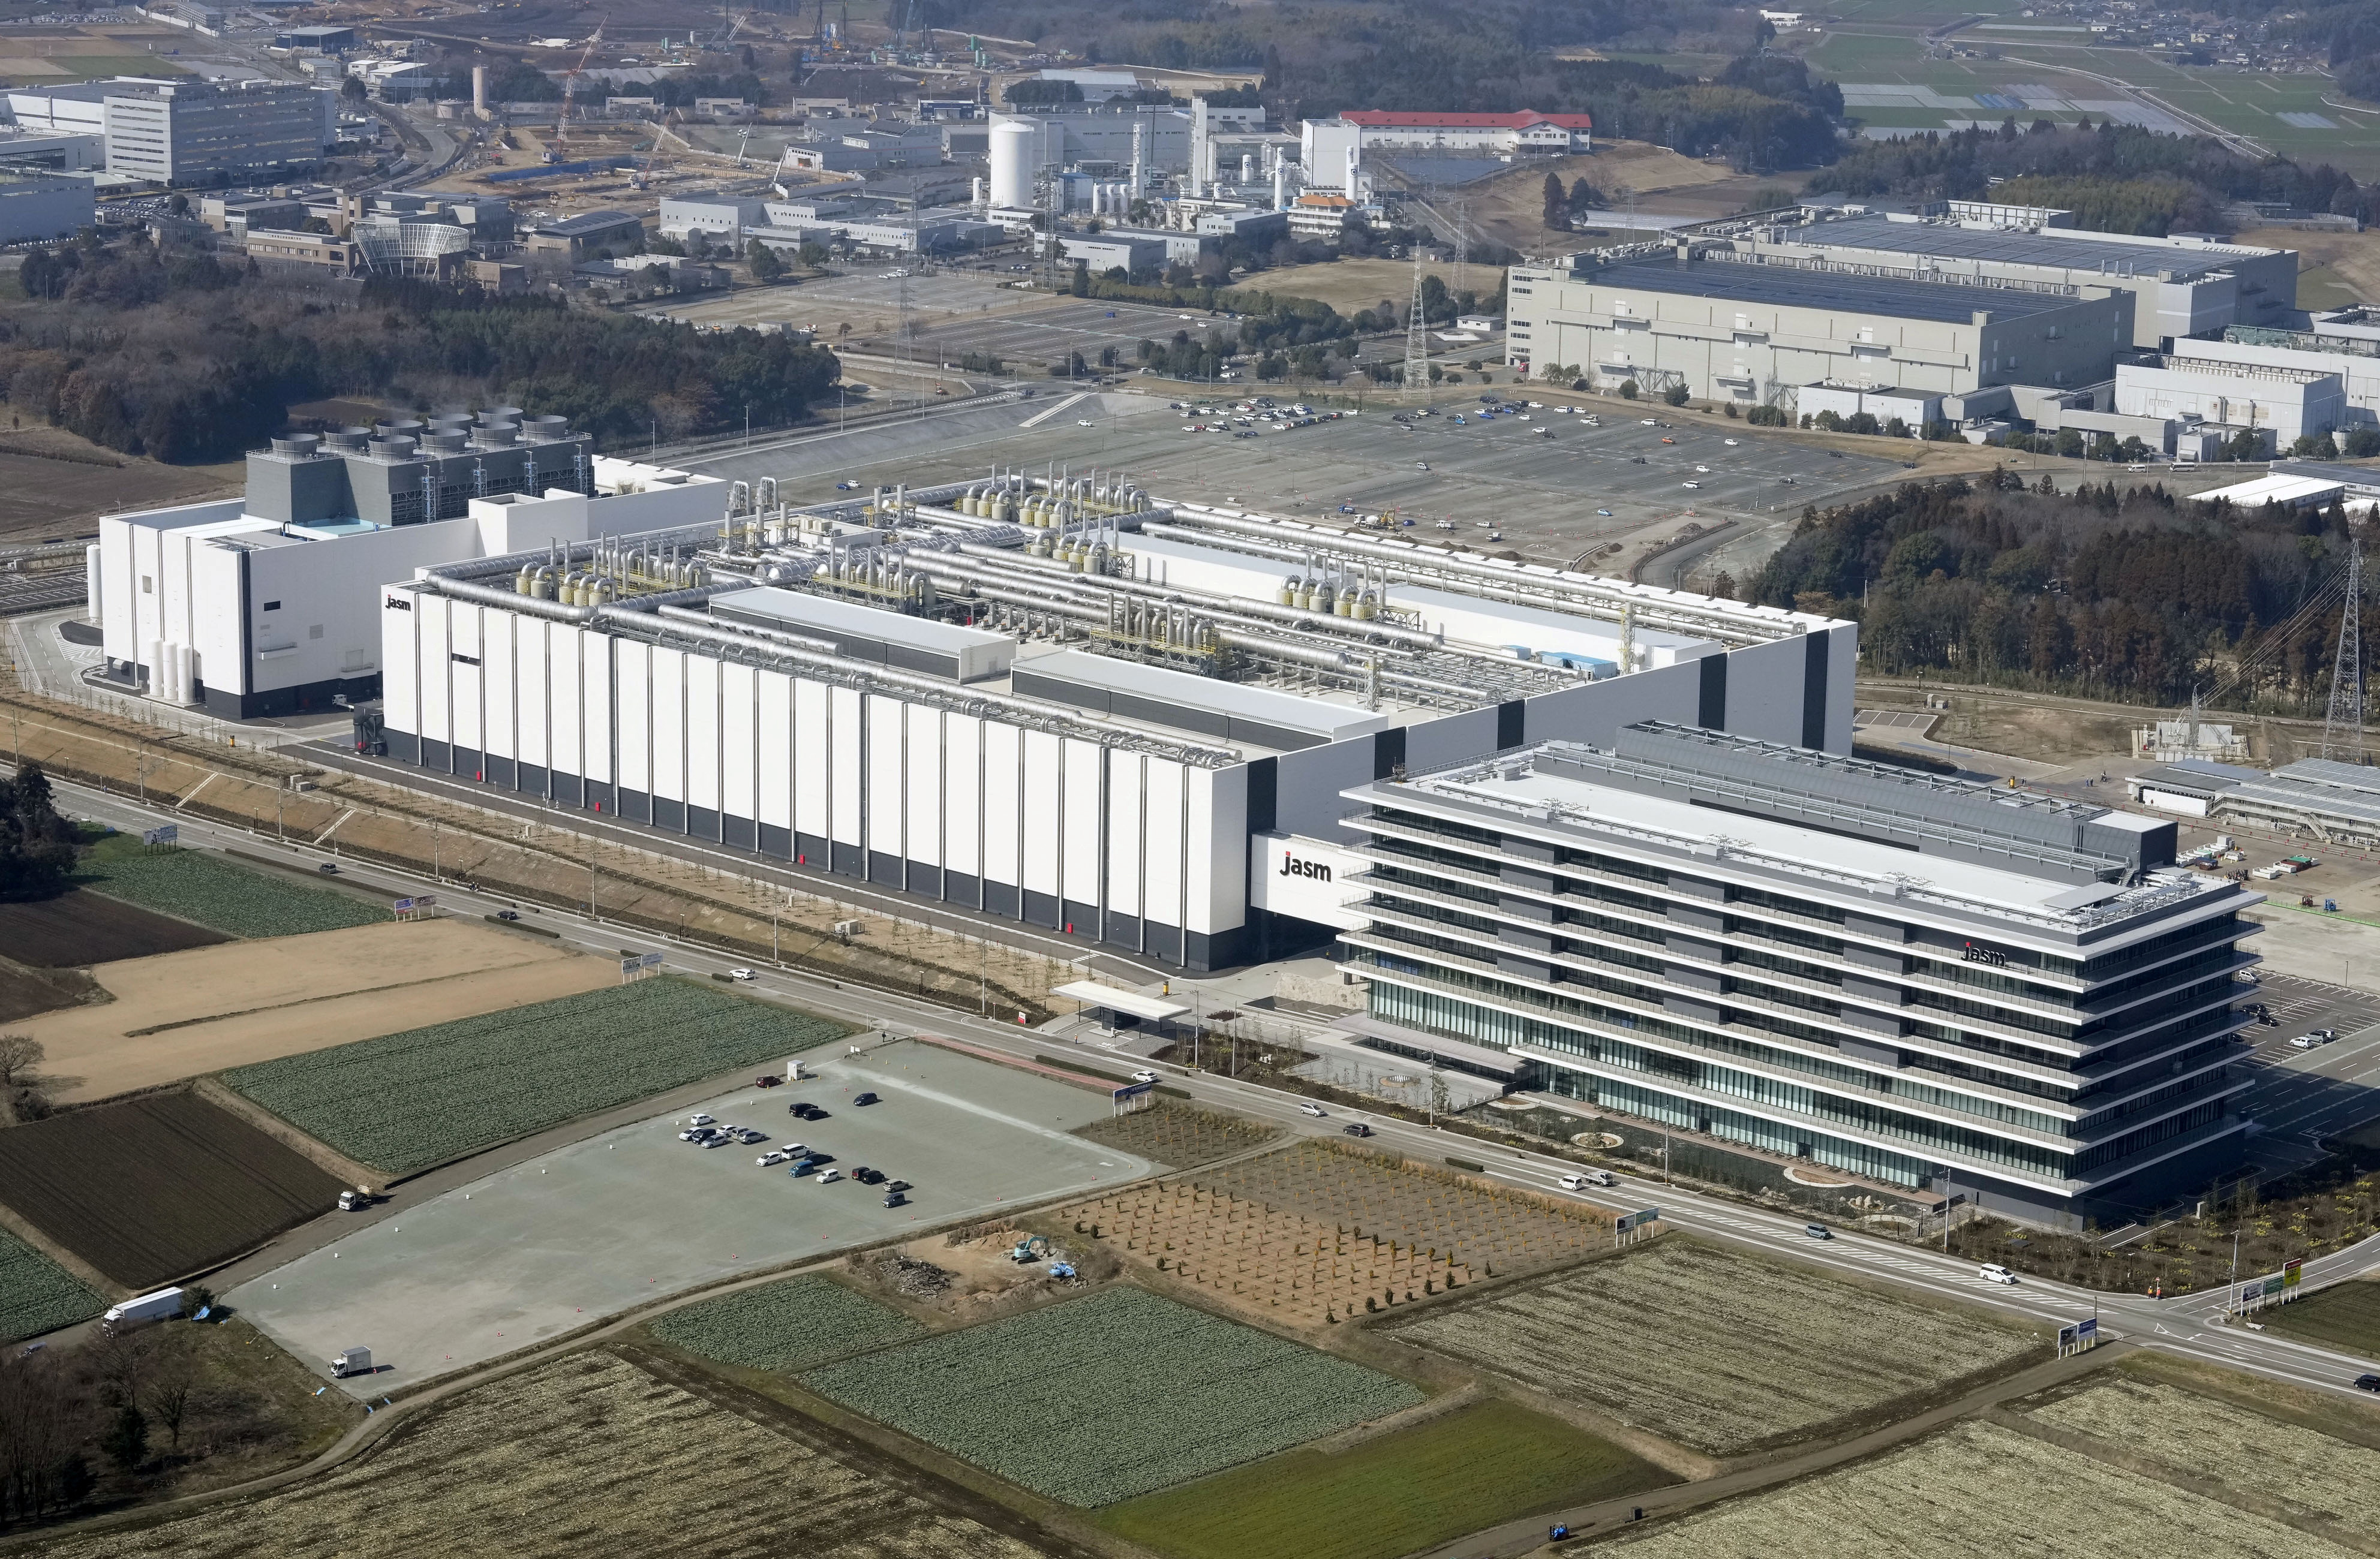 Aerial view shows the semiconductor plant by JASM, a subsidiary of Taiwan's TSMC, in Kikuyo town, Japan